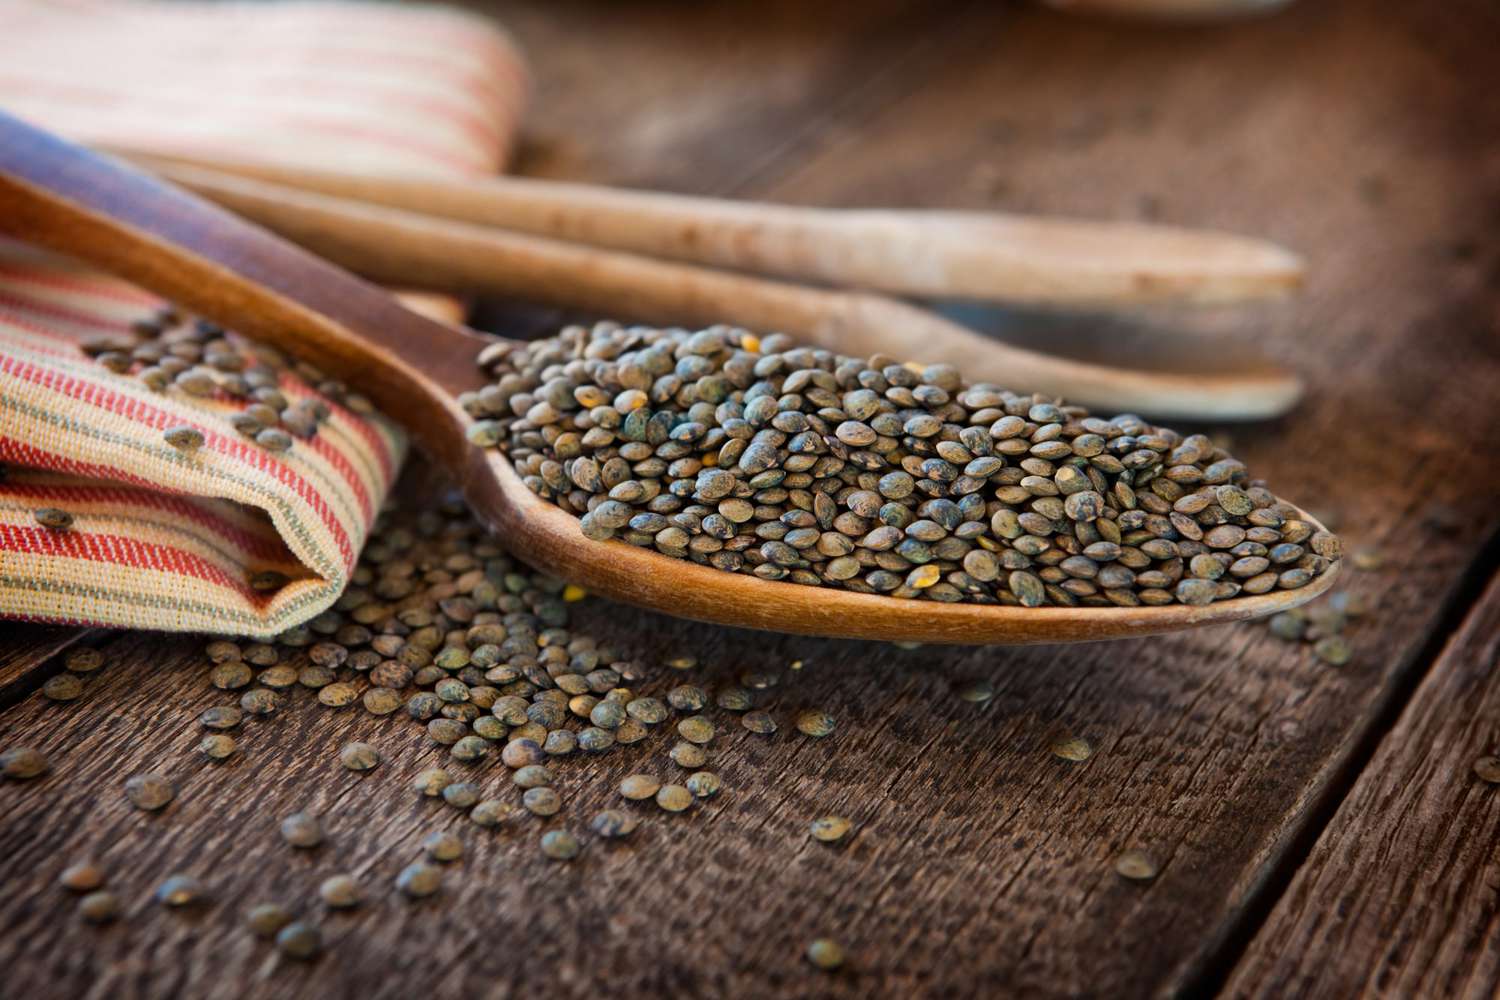 French lentils in a wooden spoon